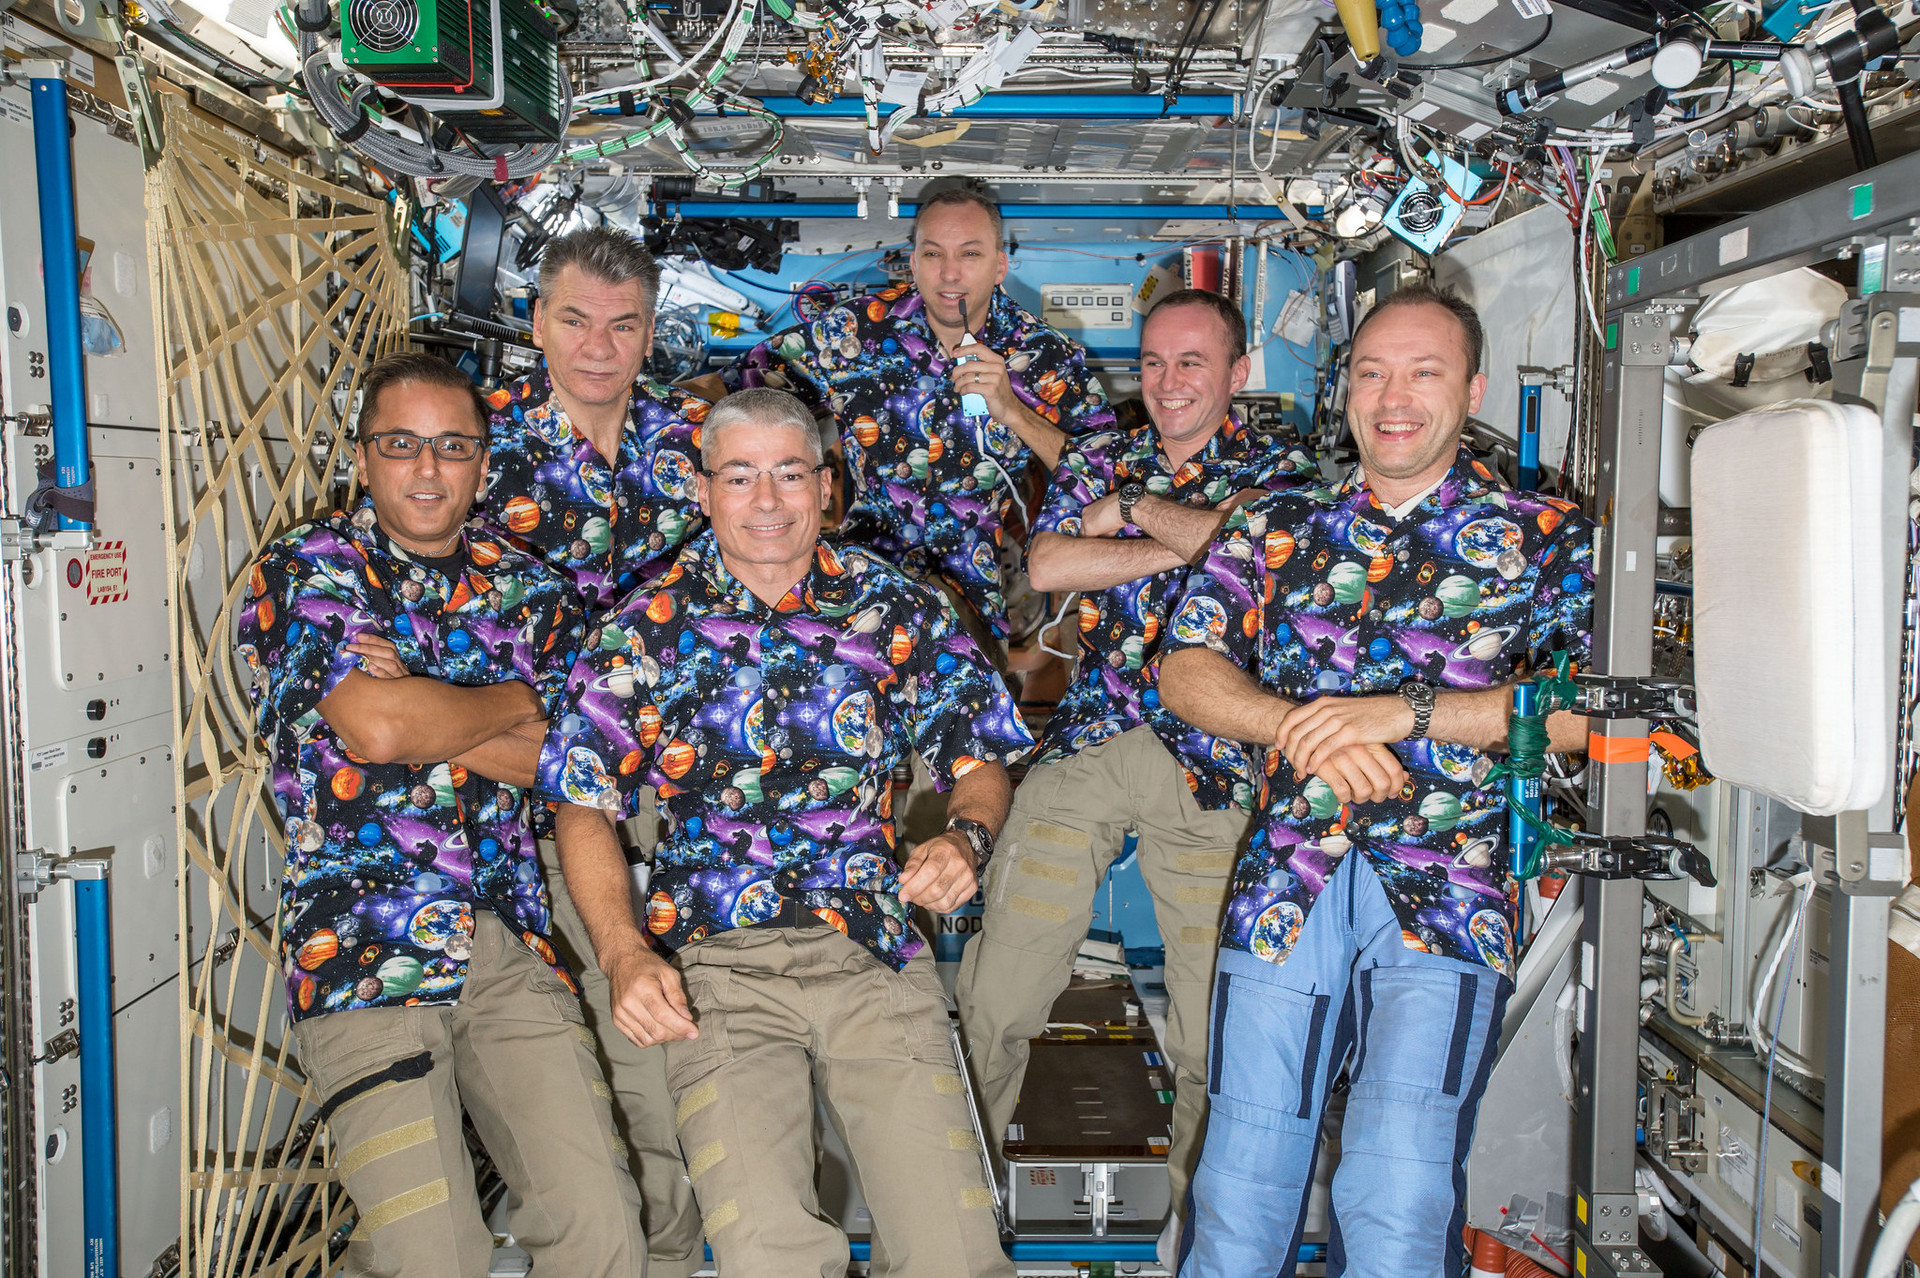 The six Expedition 53 crew members gather together in the Destiny laboratory module for a group portrait. L-R: Astronauts Joe Acaba, Paolo Nespoli and Mark Vande Hei, Commander Randy Bresnik and cosmonauts Sergey Ryazanskiy and Alexander Misurkin. Sept. 2017